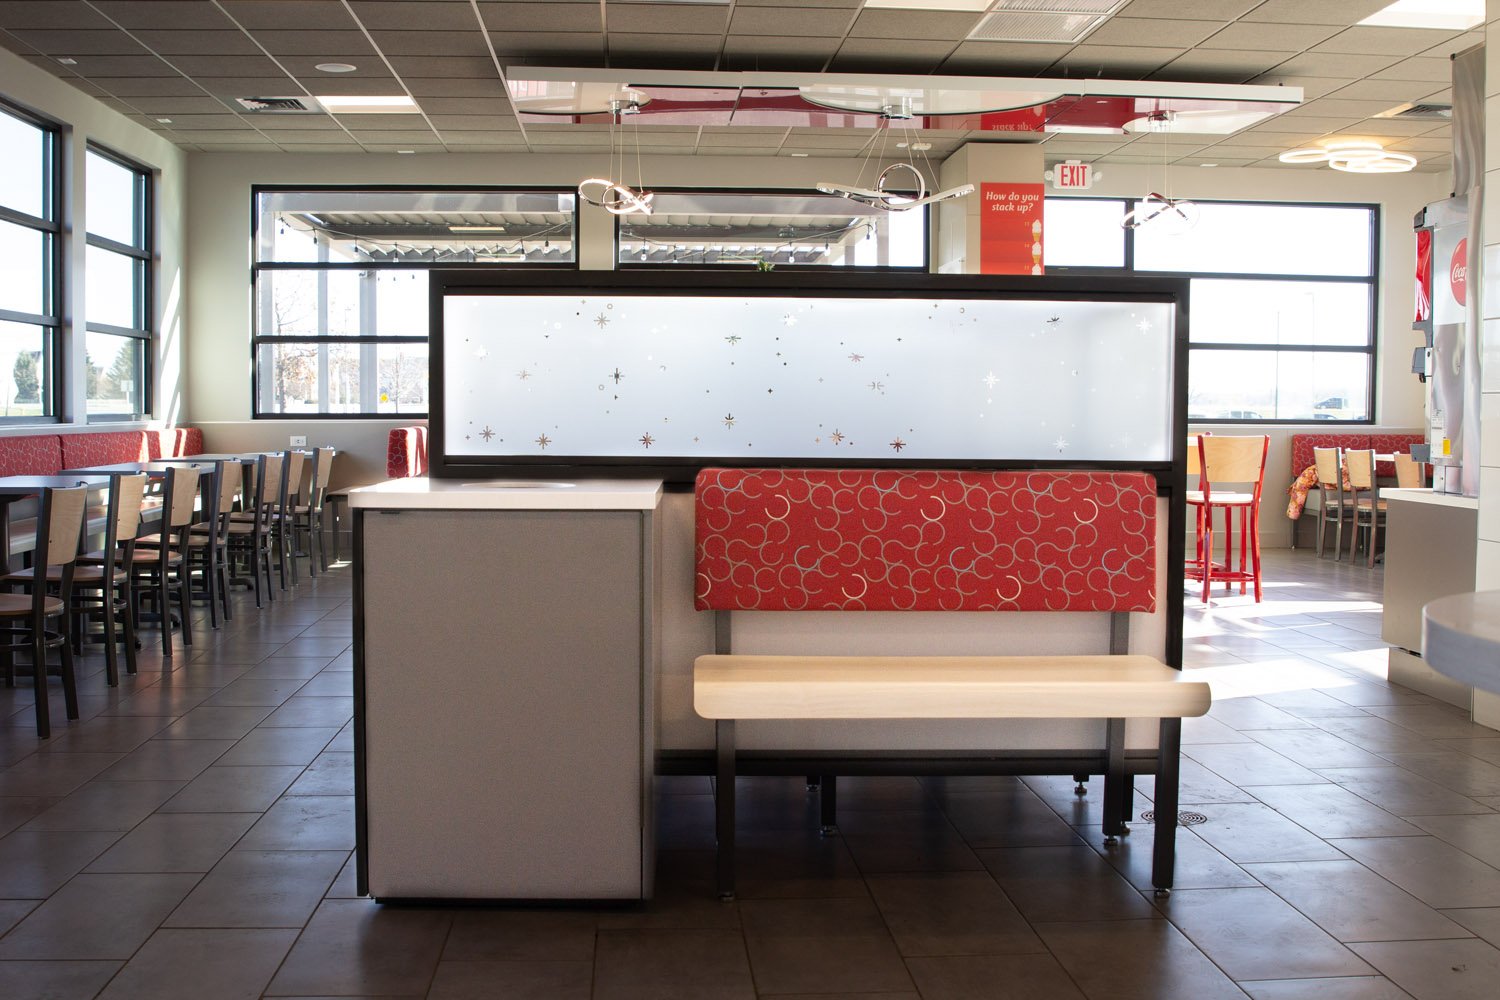 trash receptacles, divider screens, and banquette seating provided by EIS